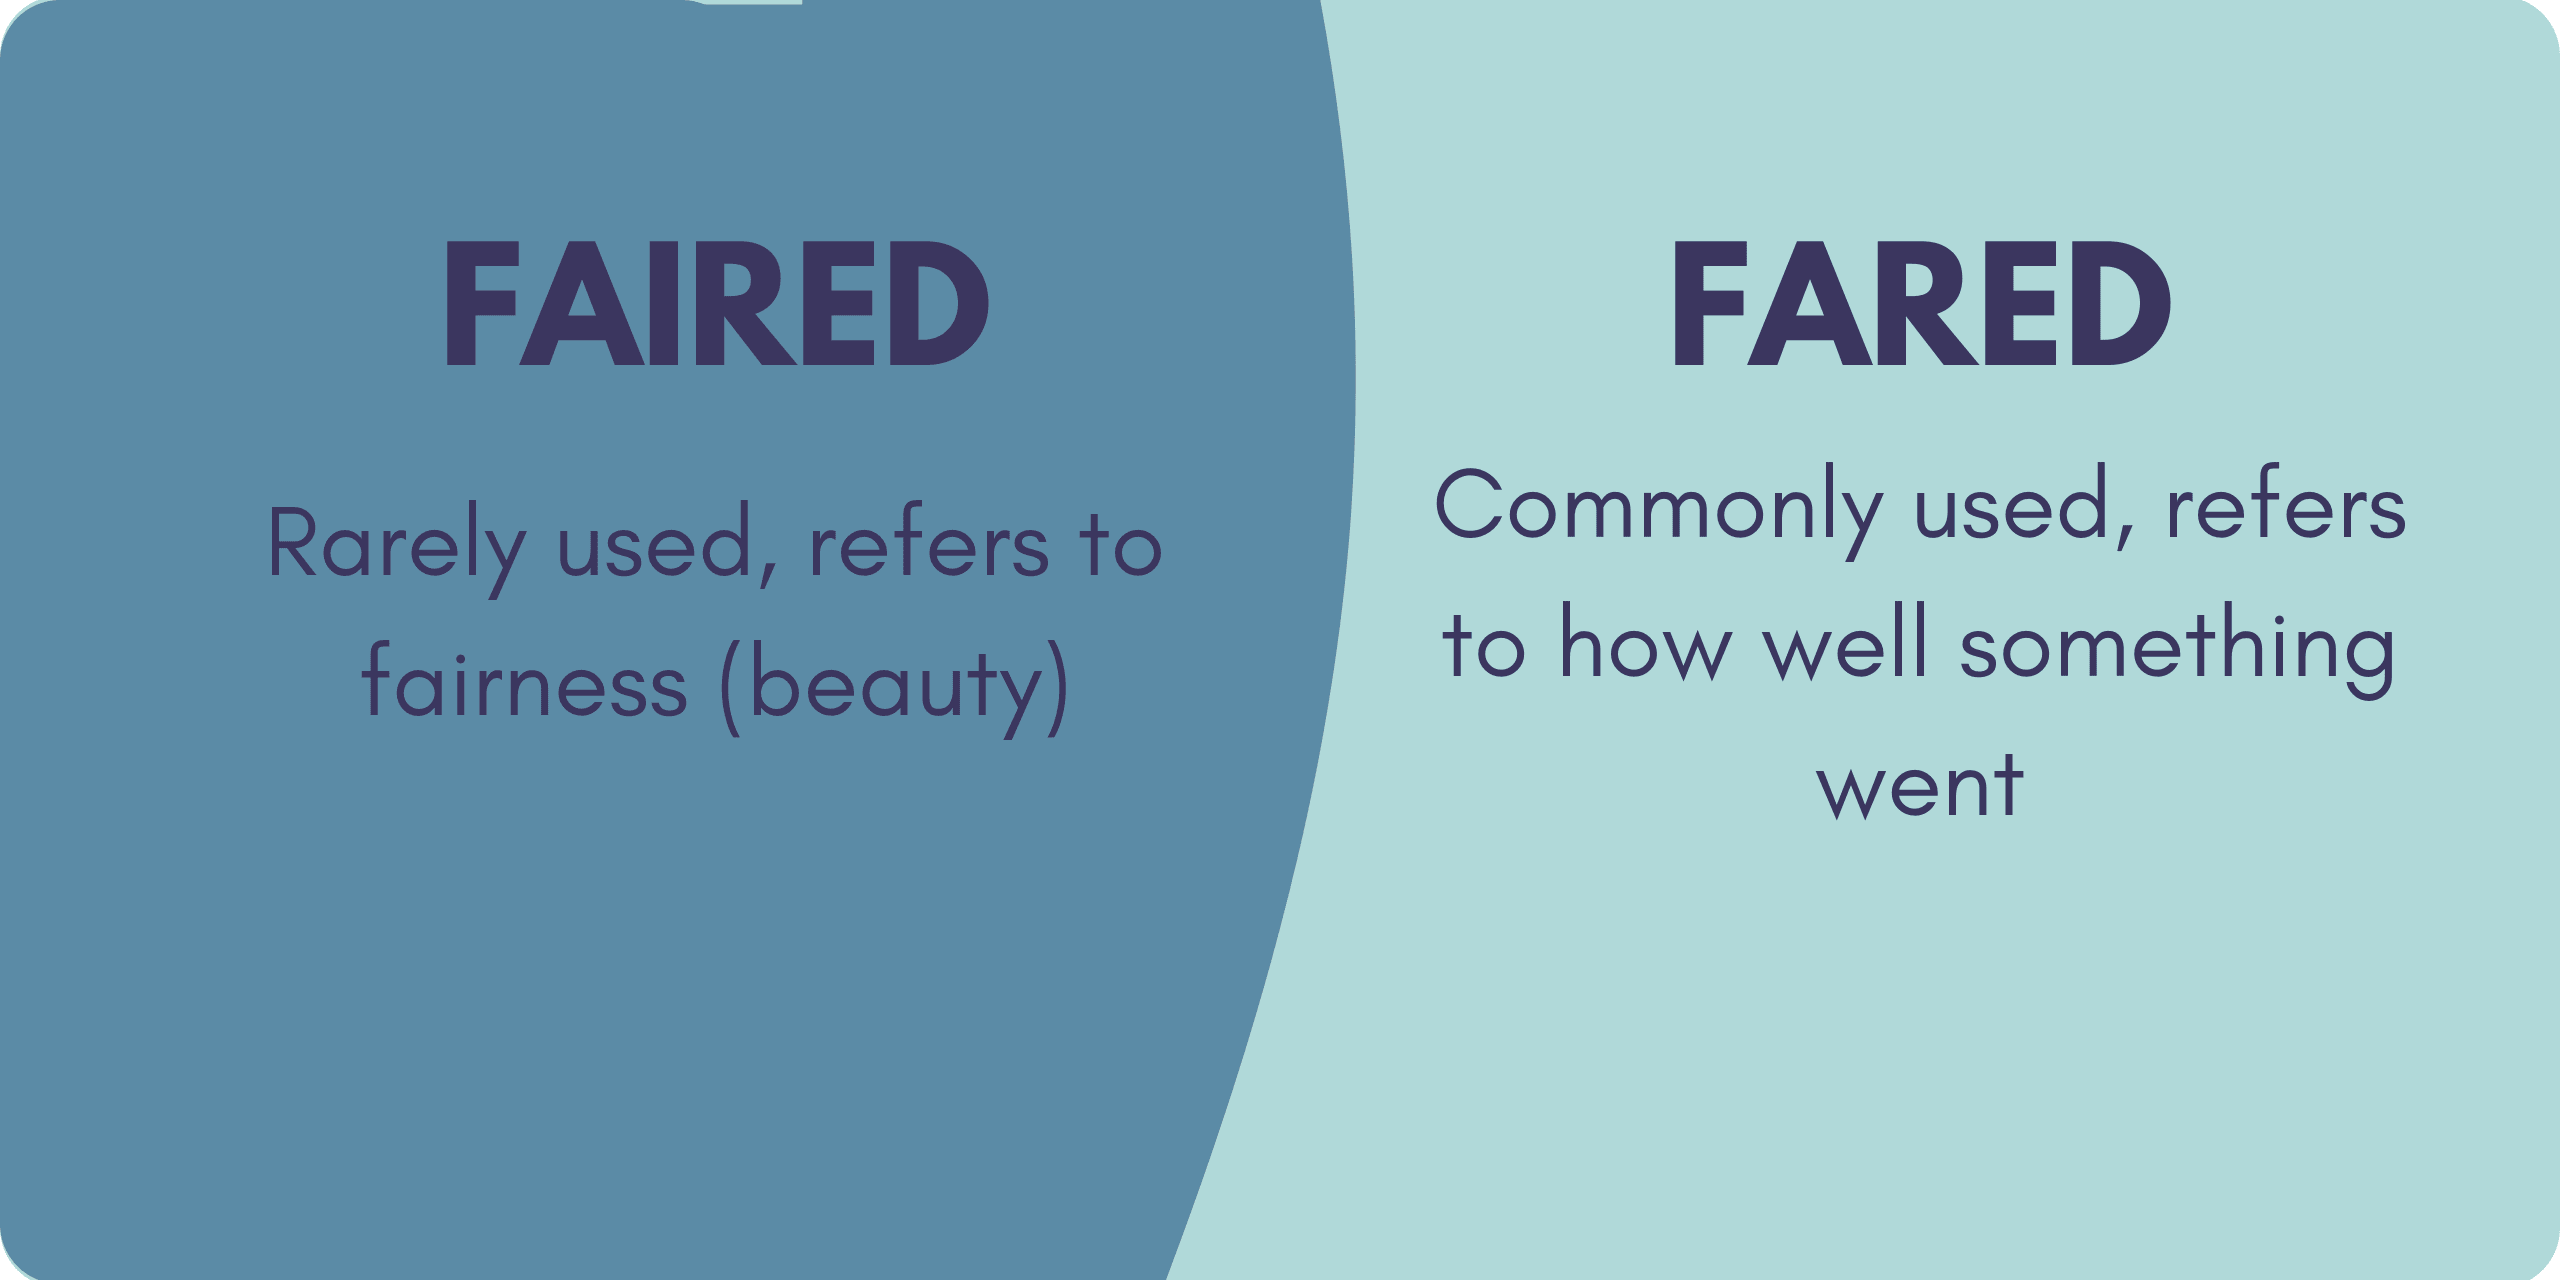 A graphic showing the difference between the words "Fared" (rarely used, refers to fairness or beauty) and "Fared" (Commonly used, refers to how well something went)